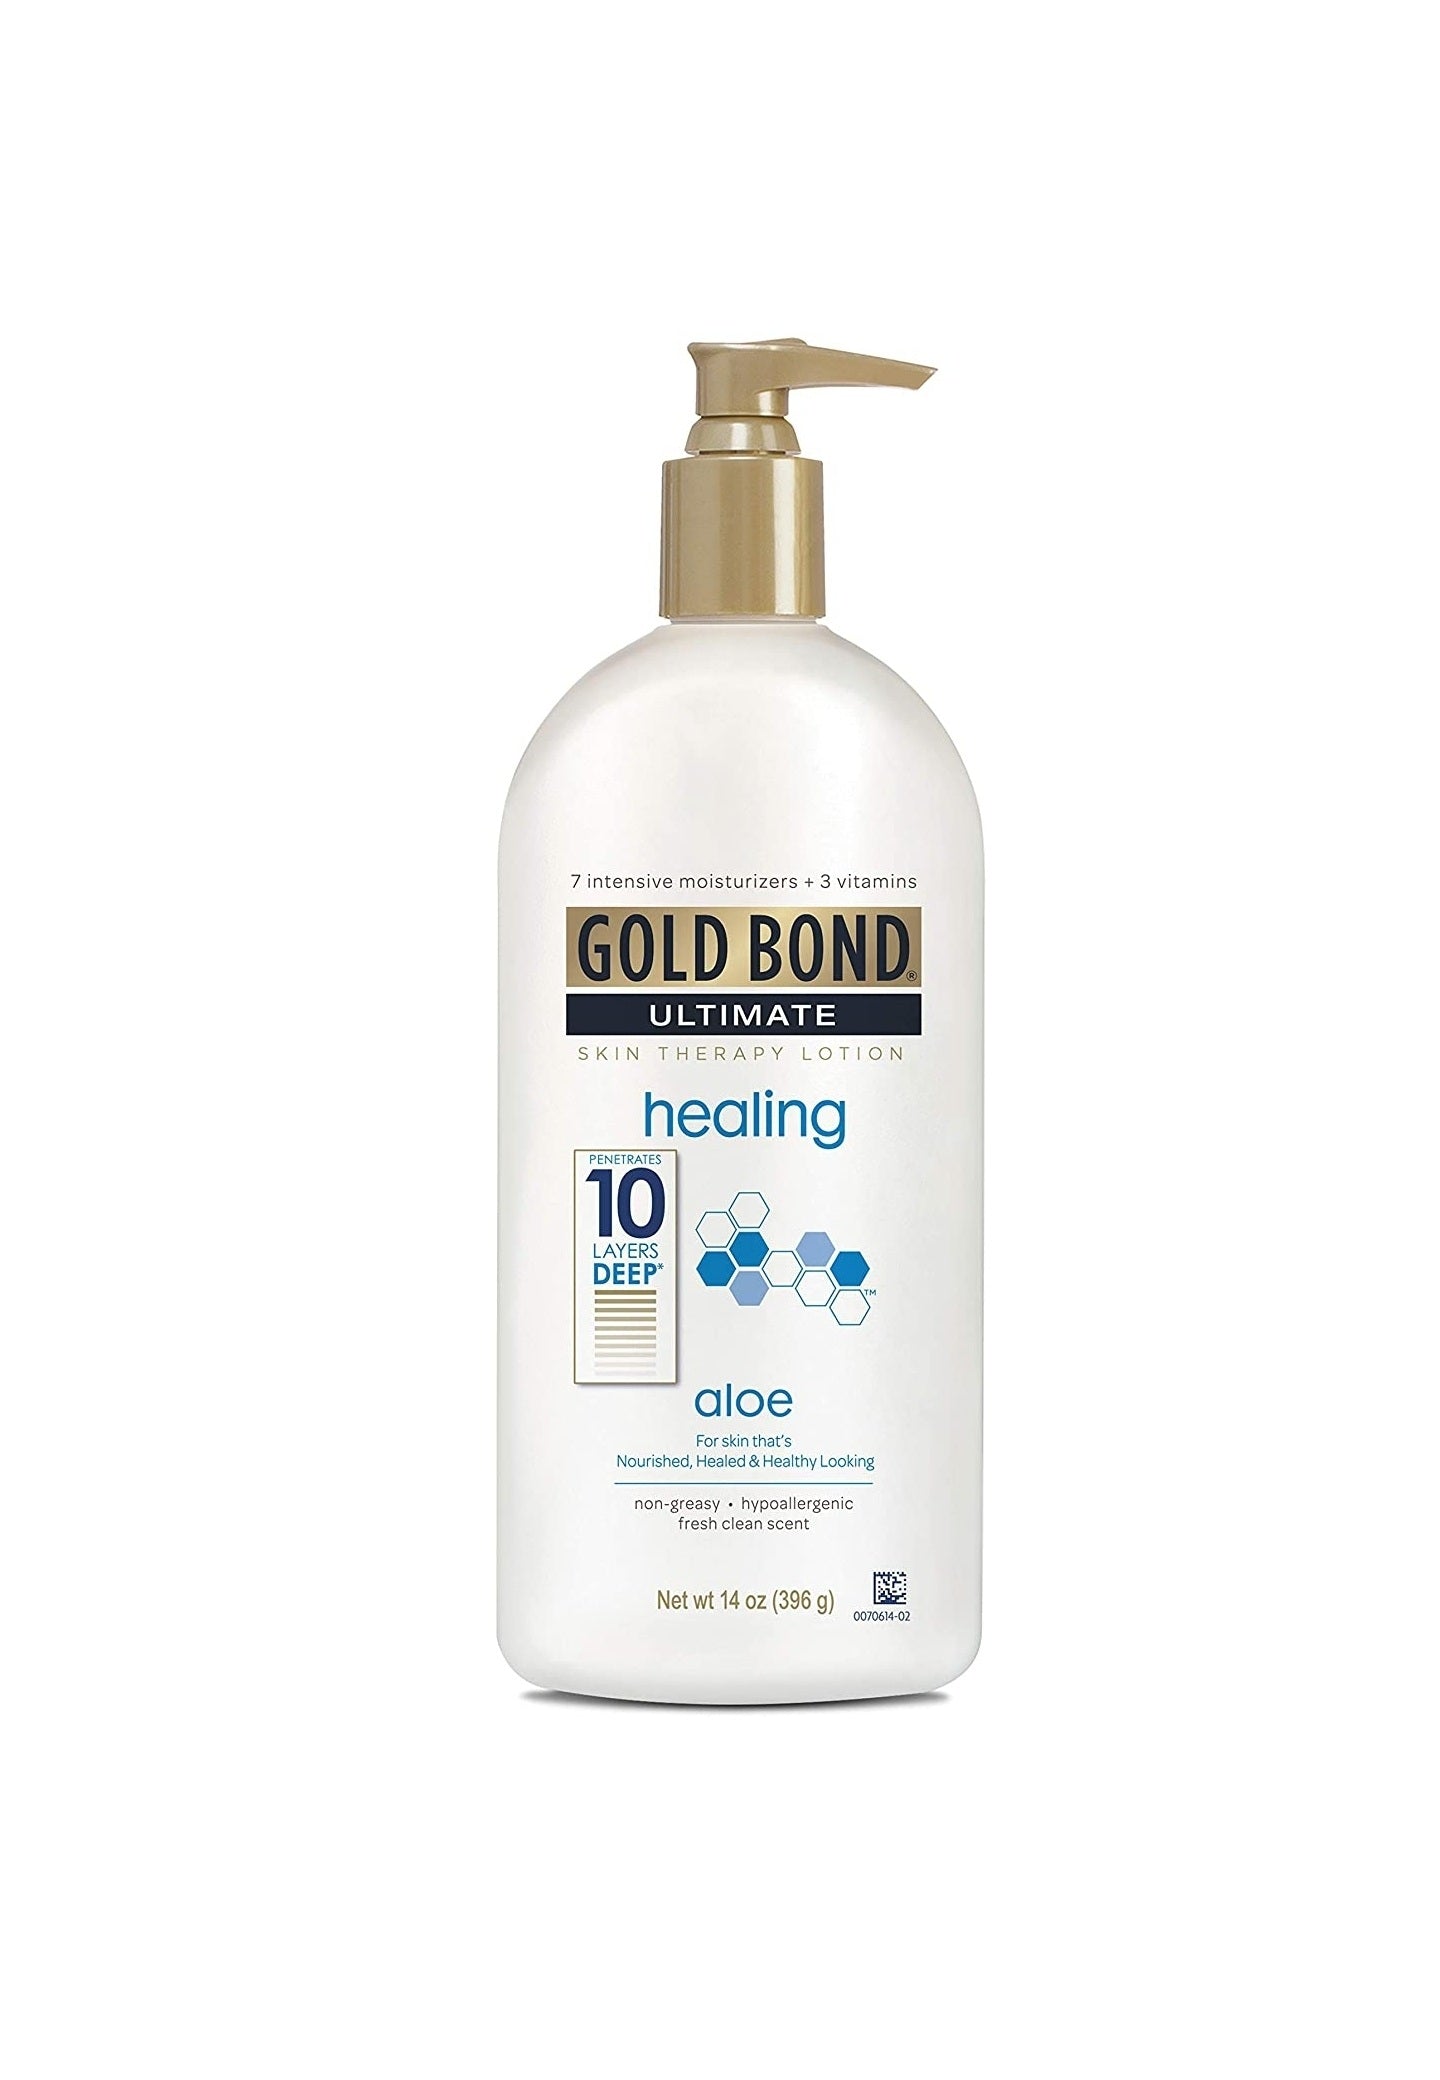 GOLD BOND ULTIMATE HEALING SKIN THERAPY LOTION